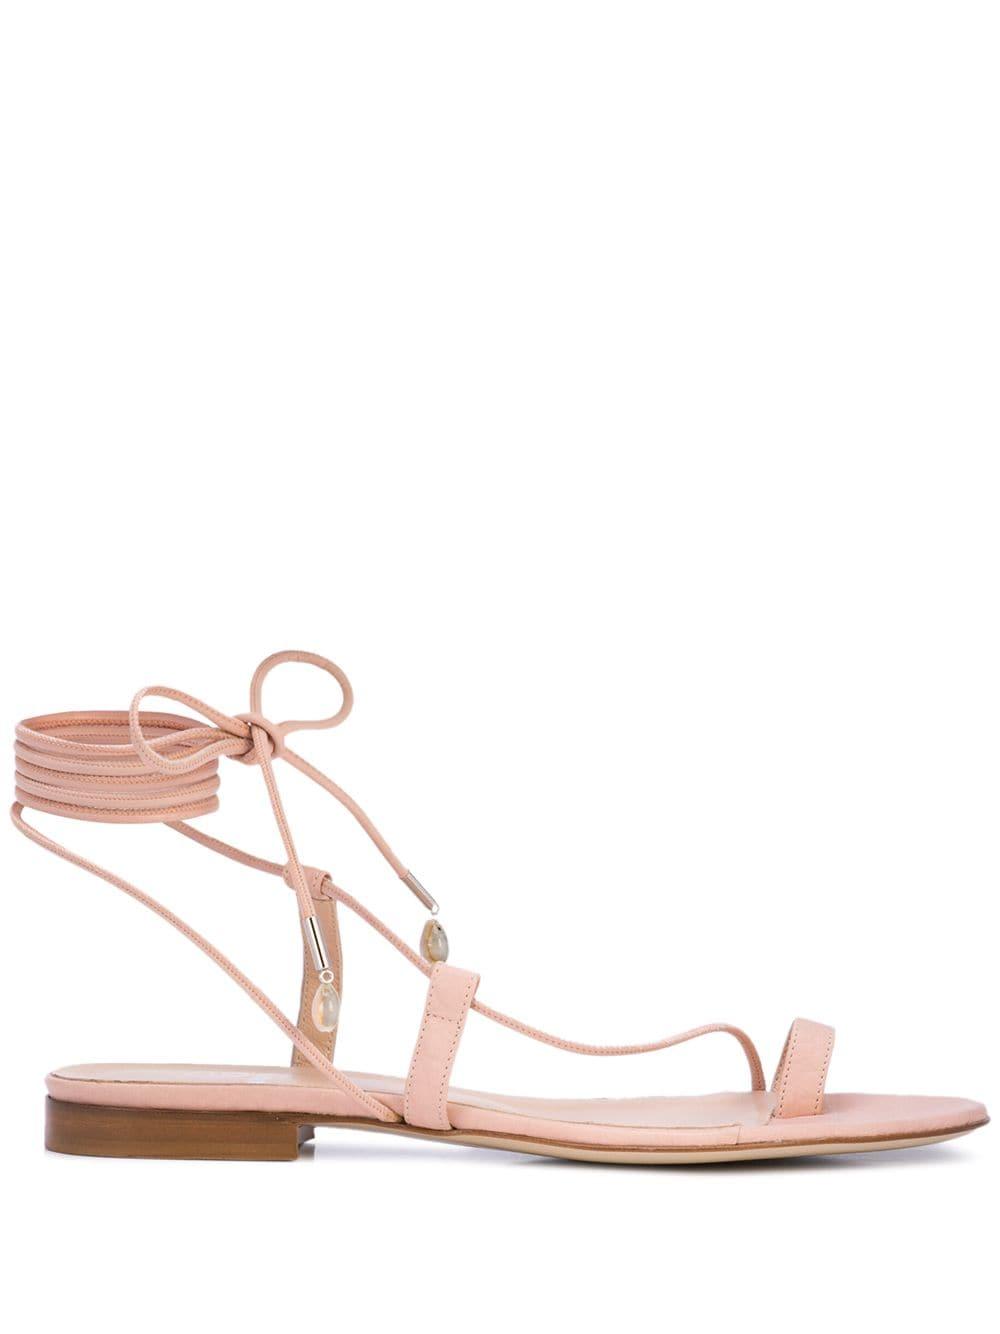 Brother Vellies Selma Sandals in Pink - Lyst